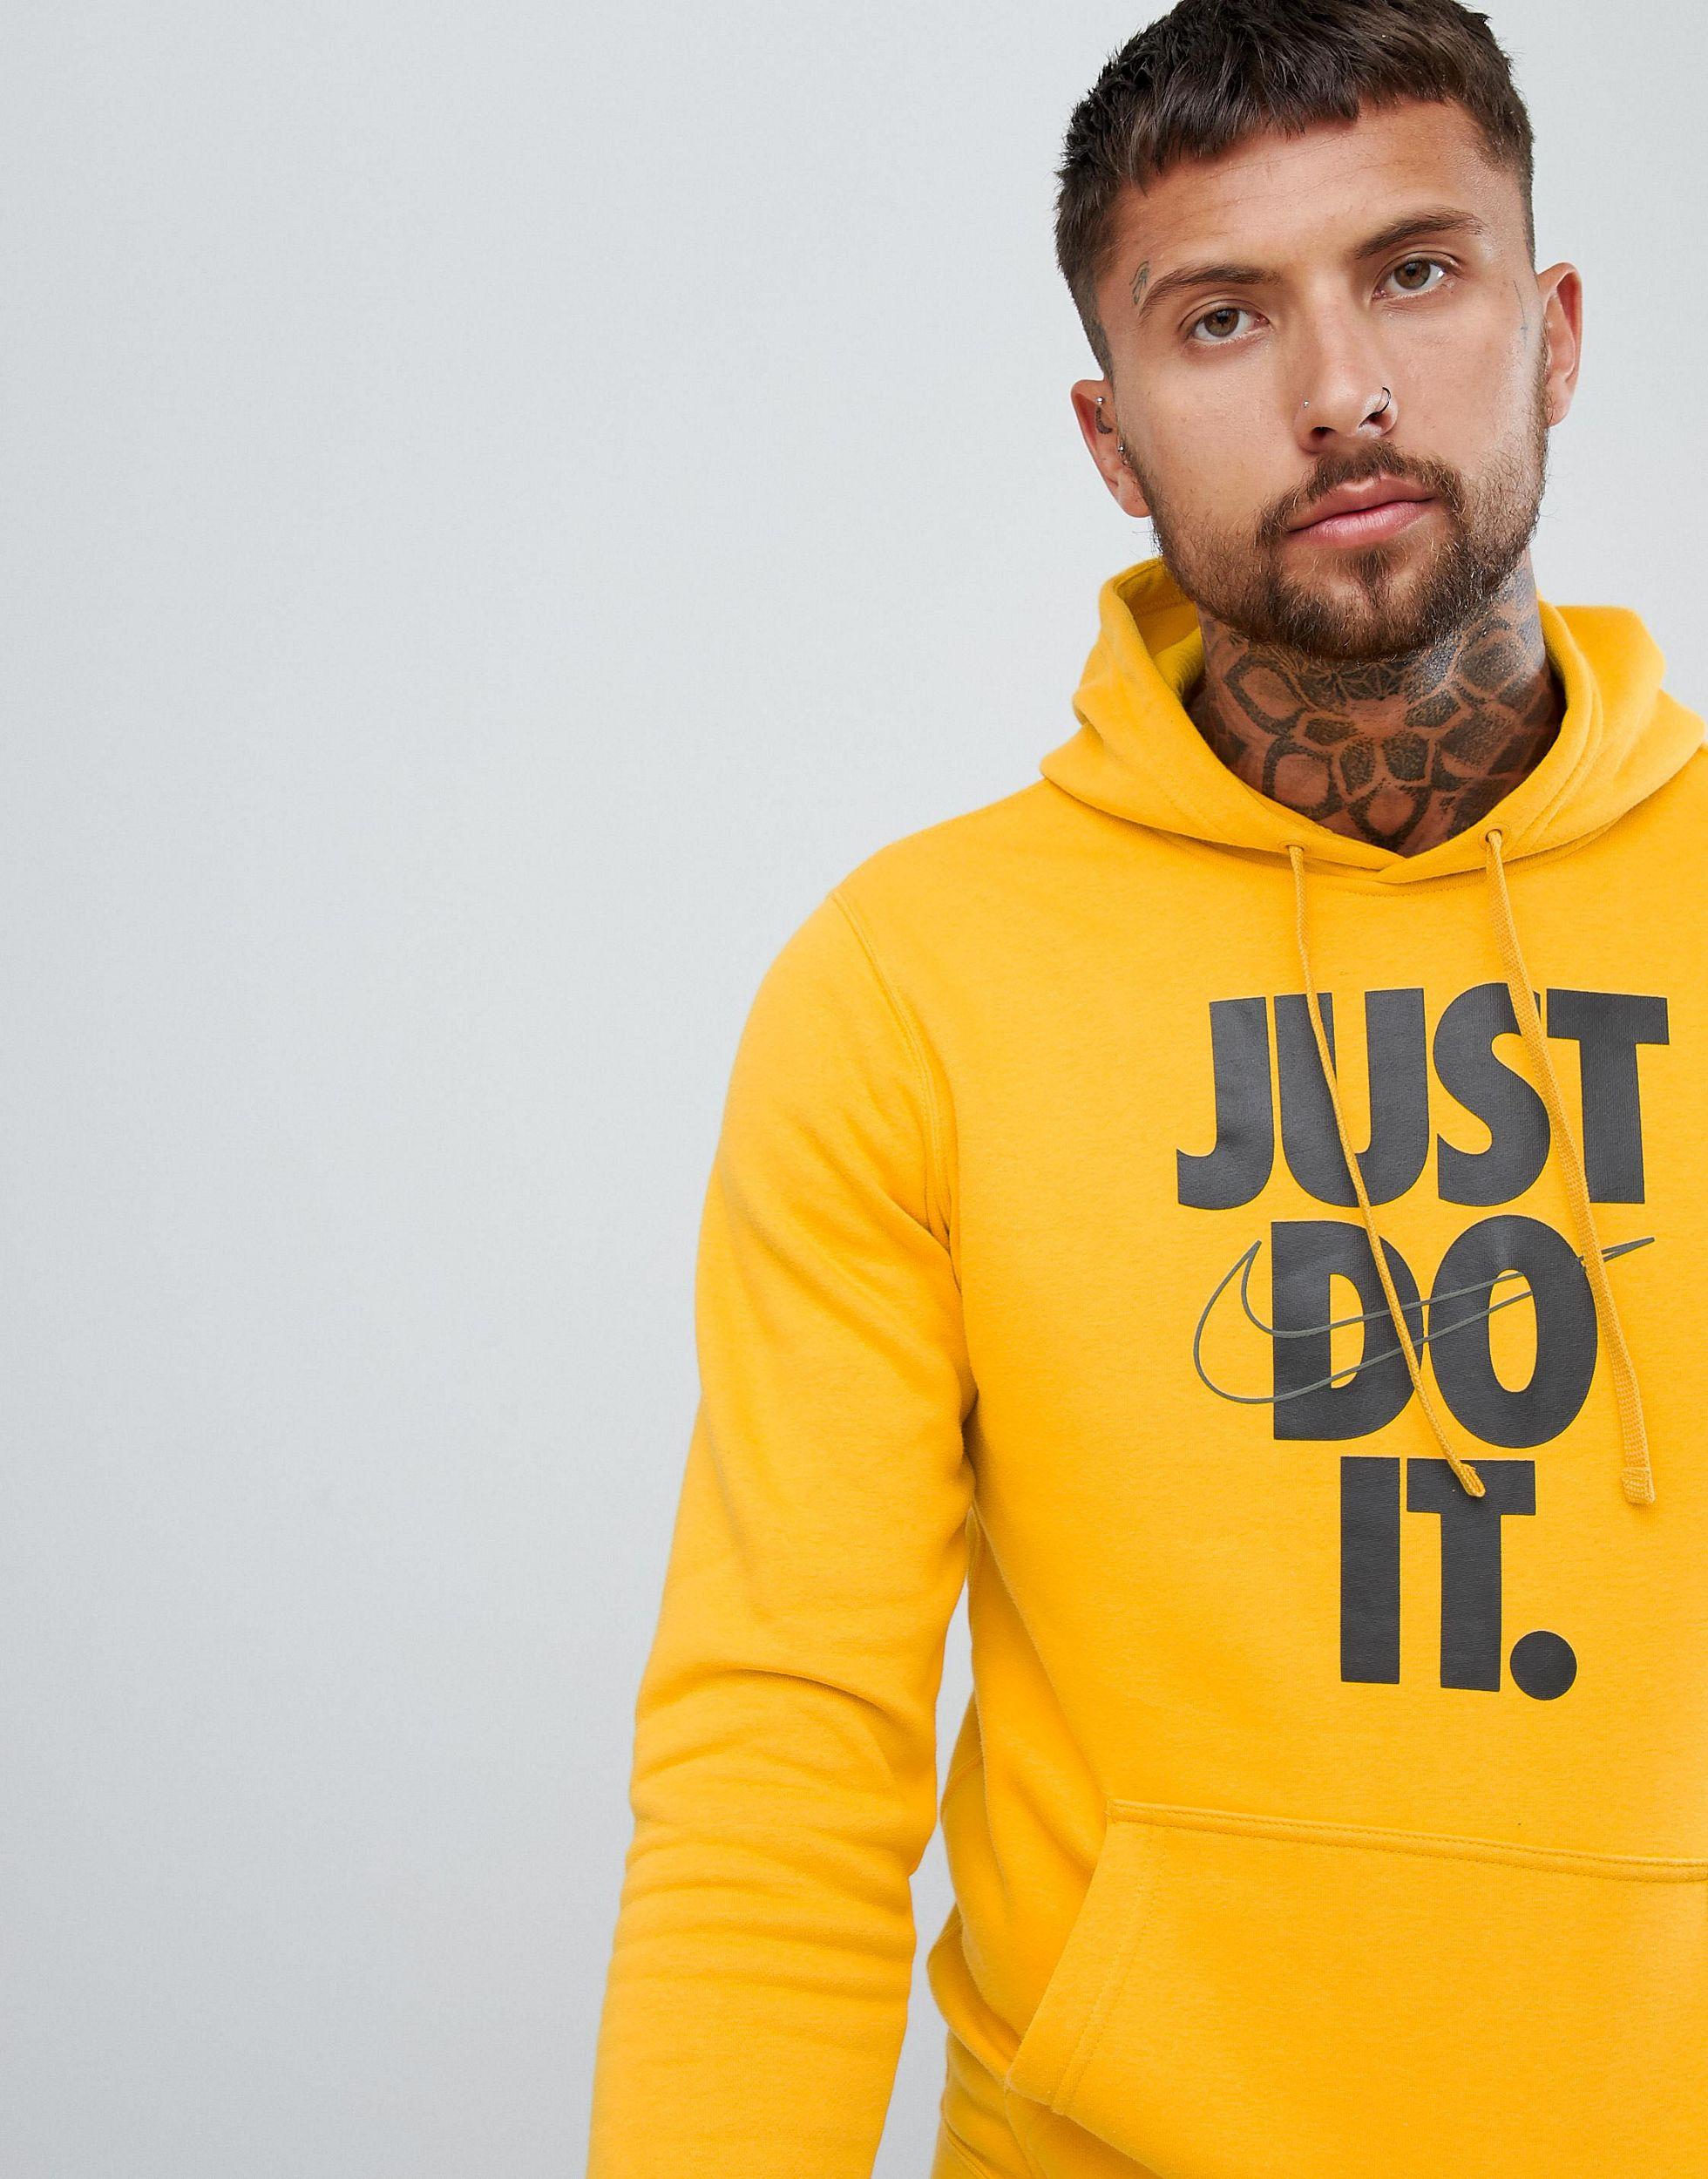 Sweat Nike Jaune Homme Discounts Collection, 57% OFF | drtomasgarcia.com.br